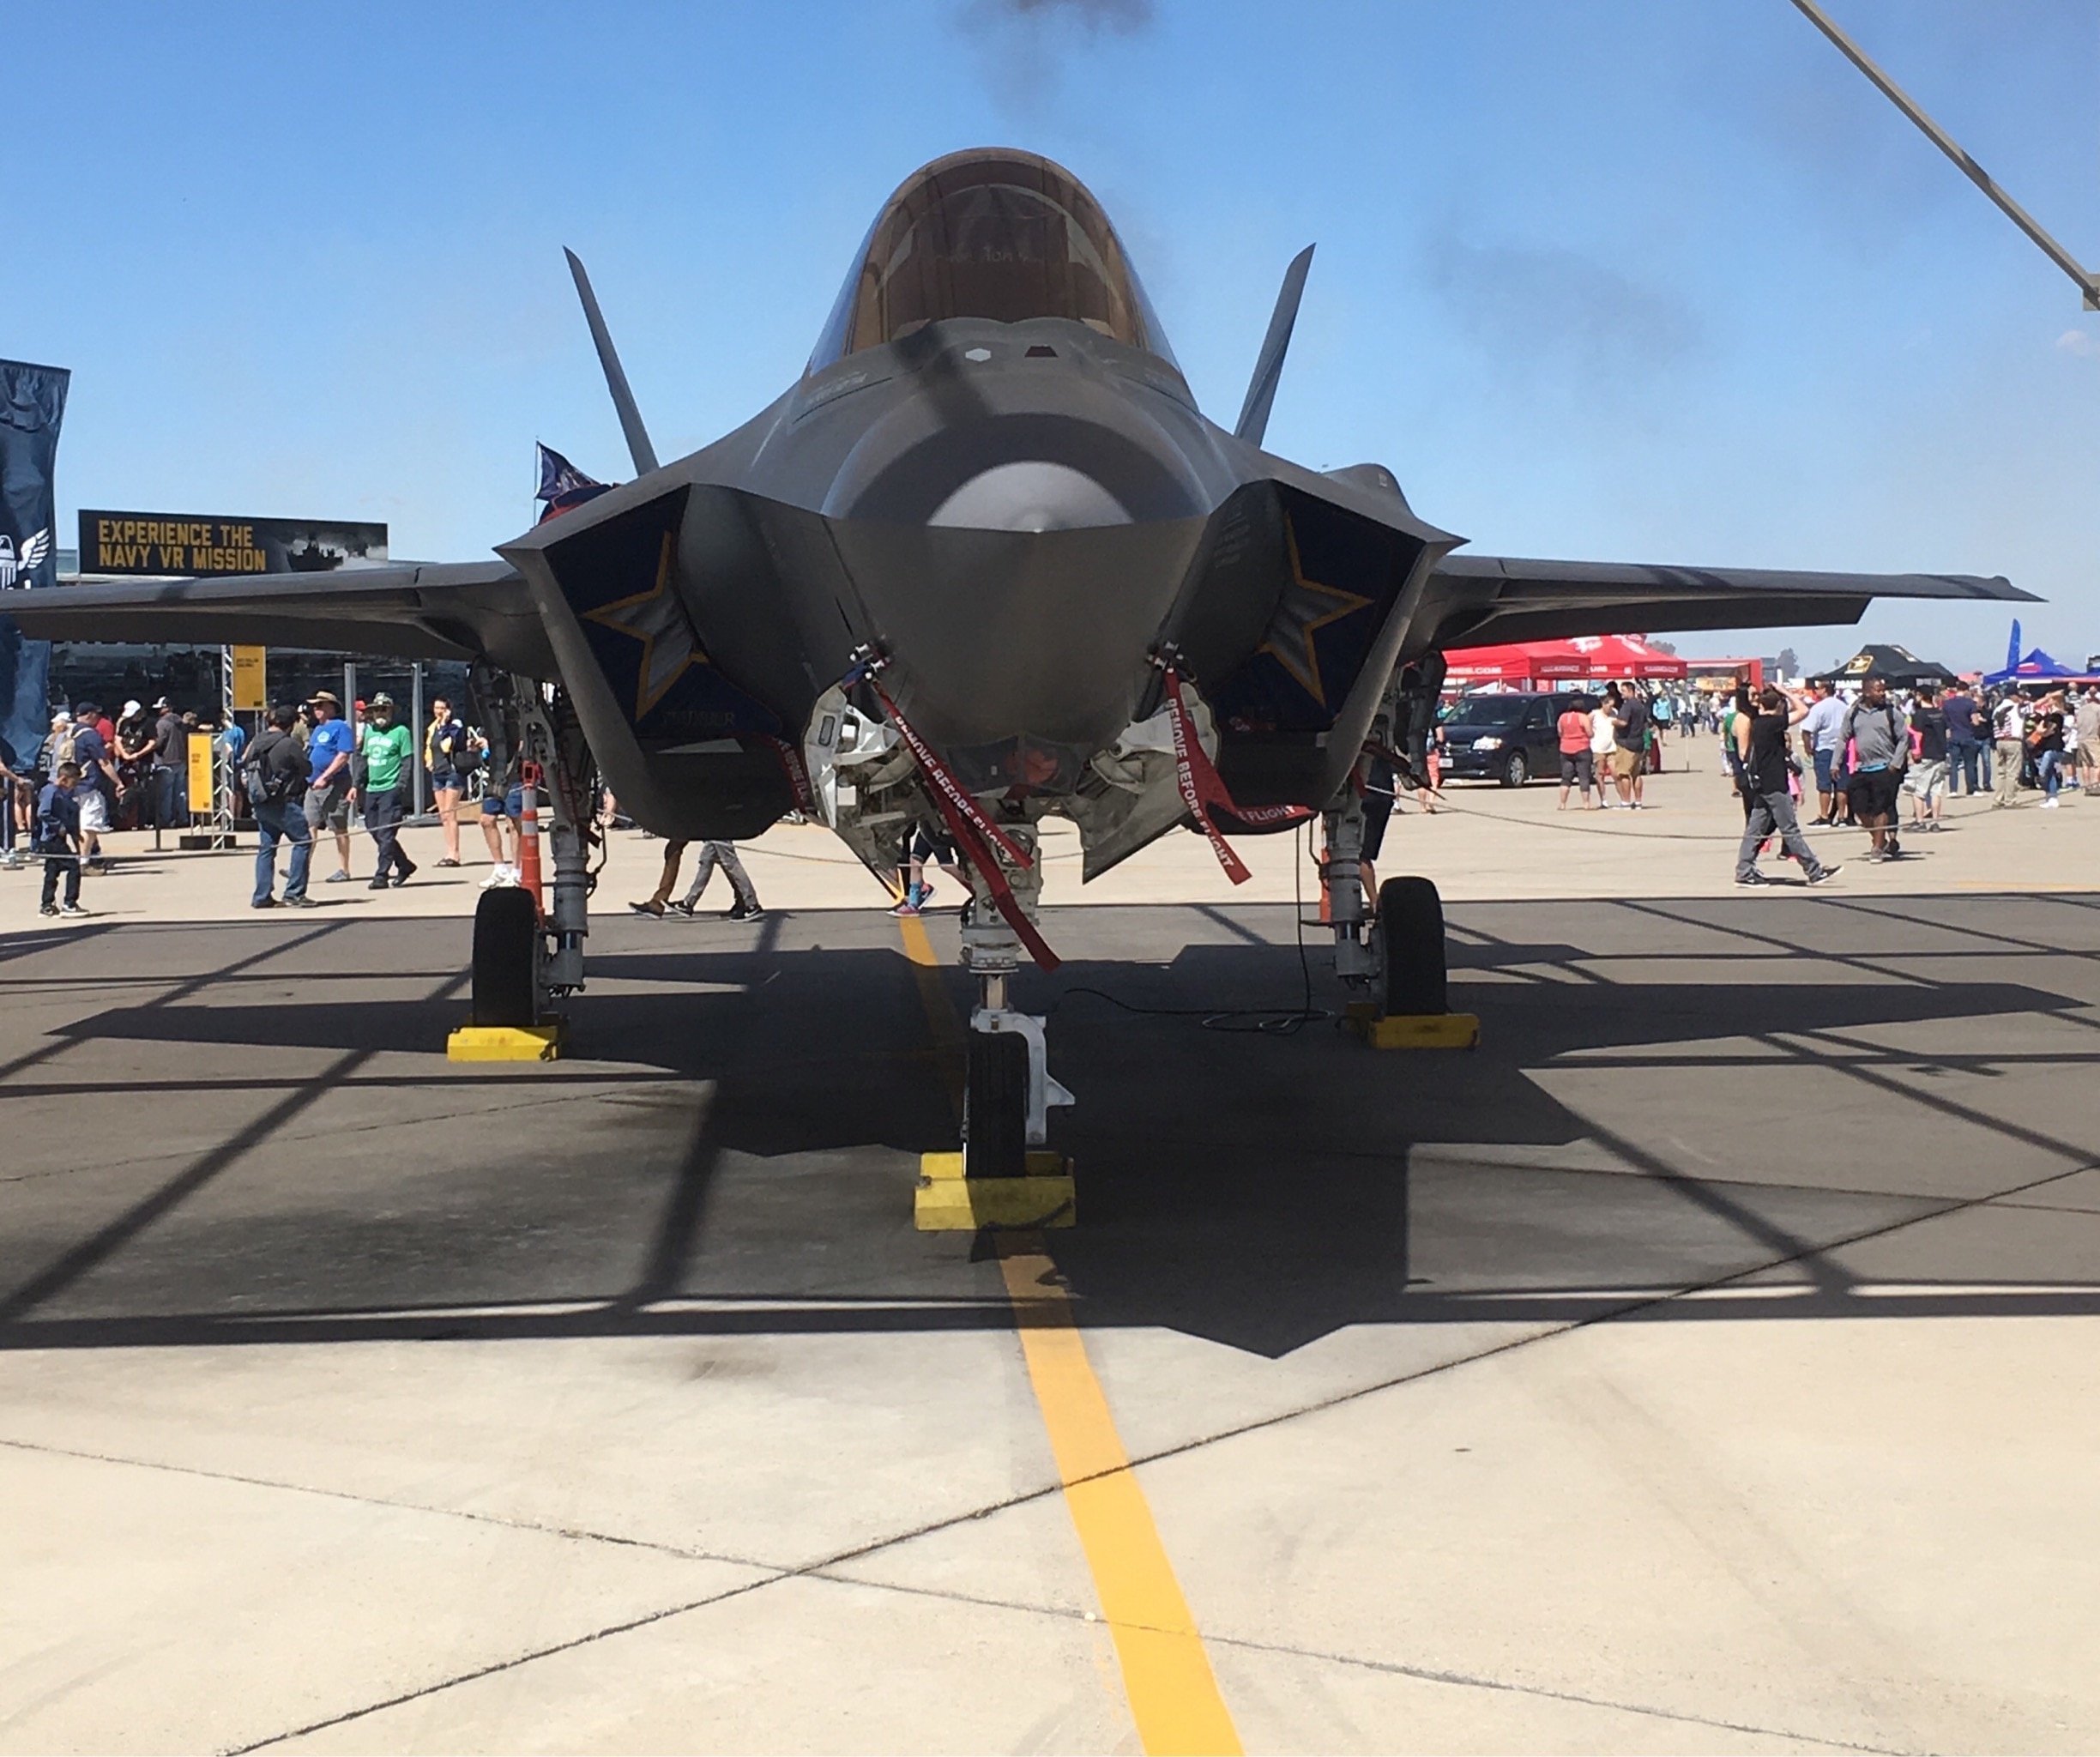 It was cool seeing all the jets at Luke Days! 